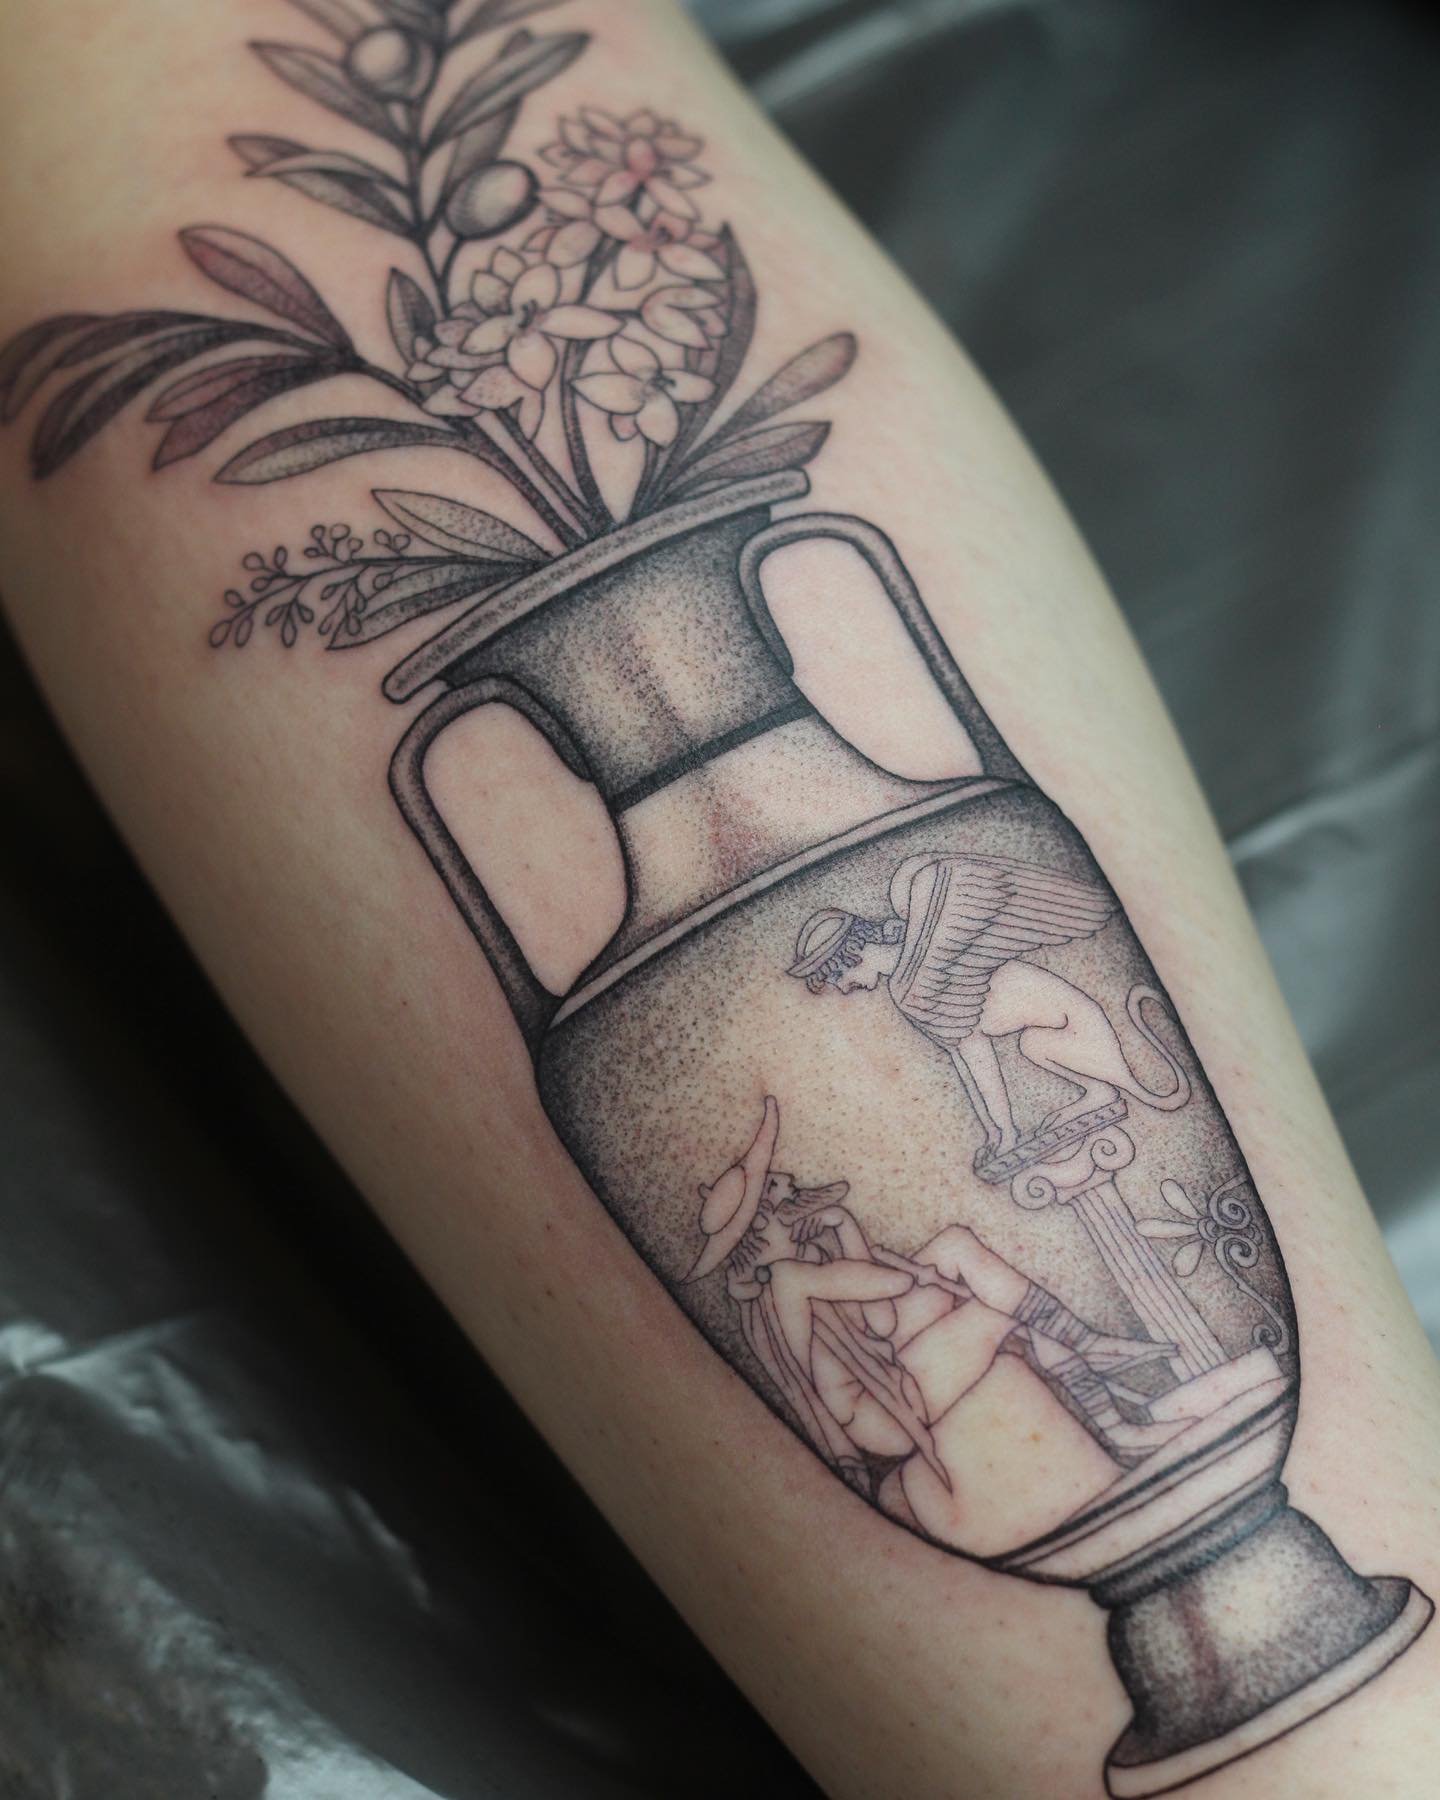 Greek amphora with olive branches 🏺
Thank you Helene 🫶